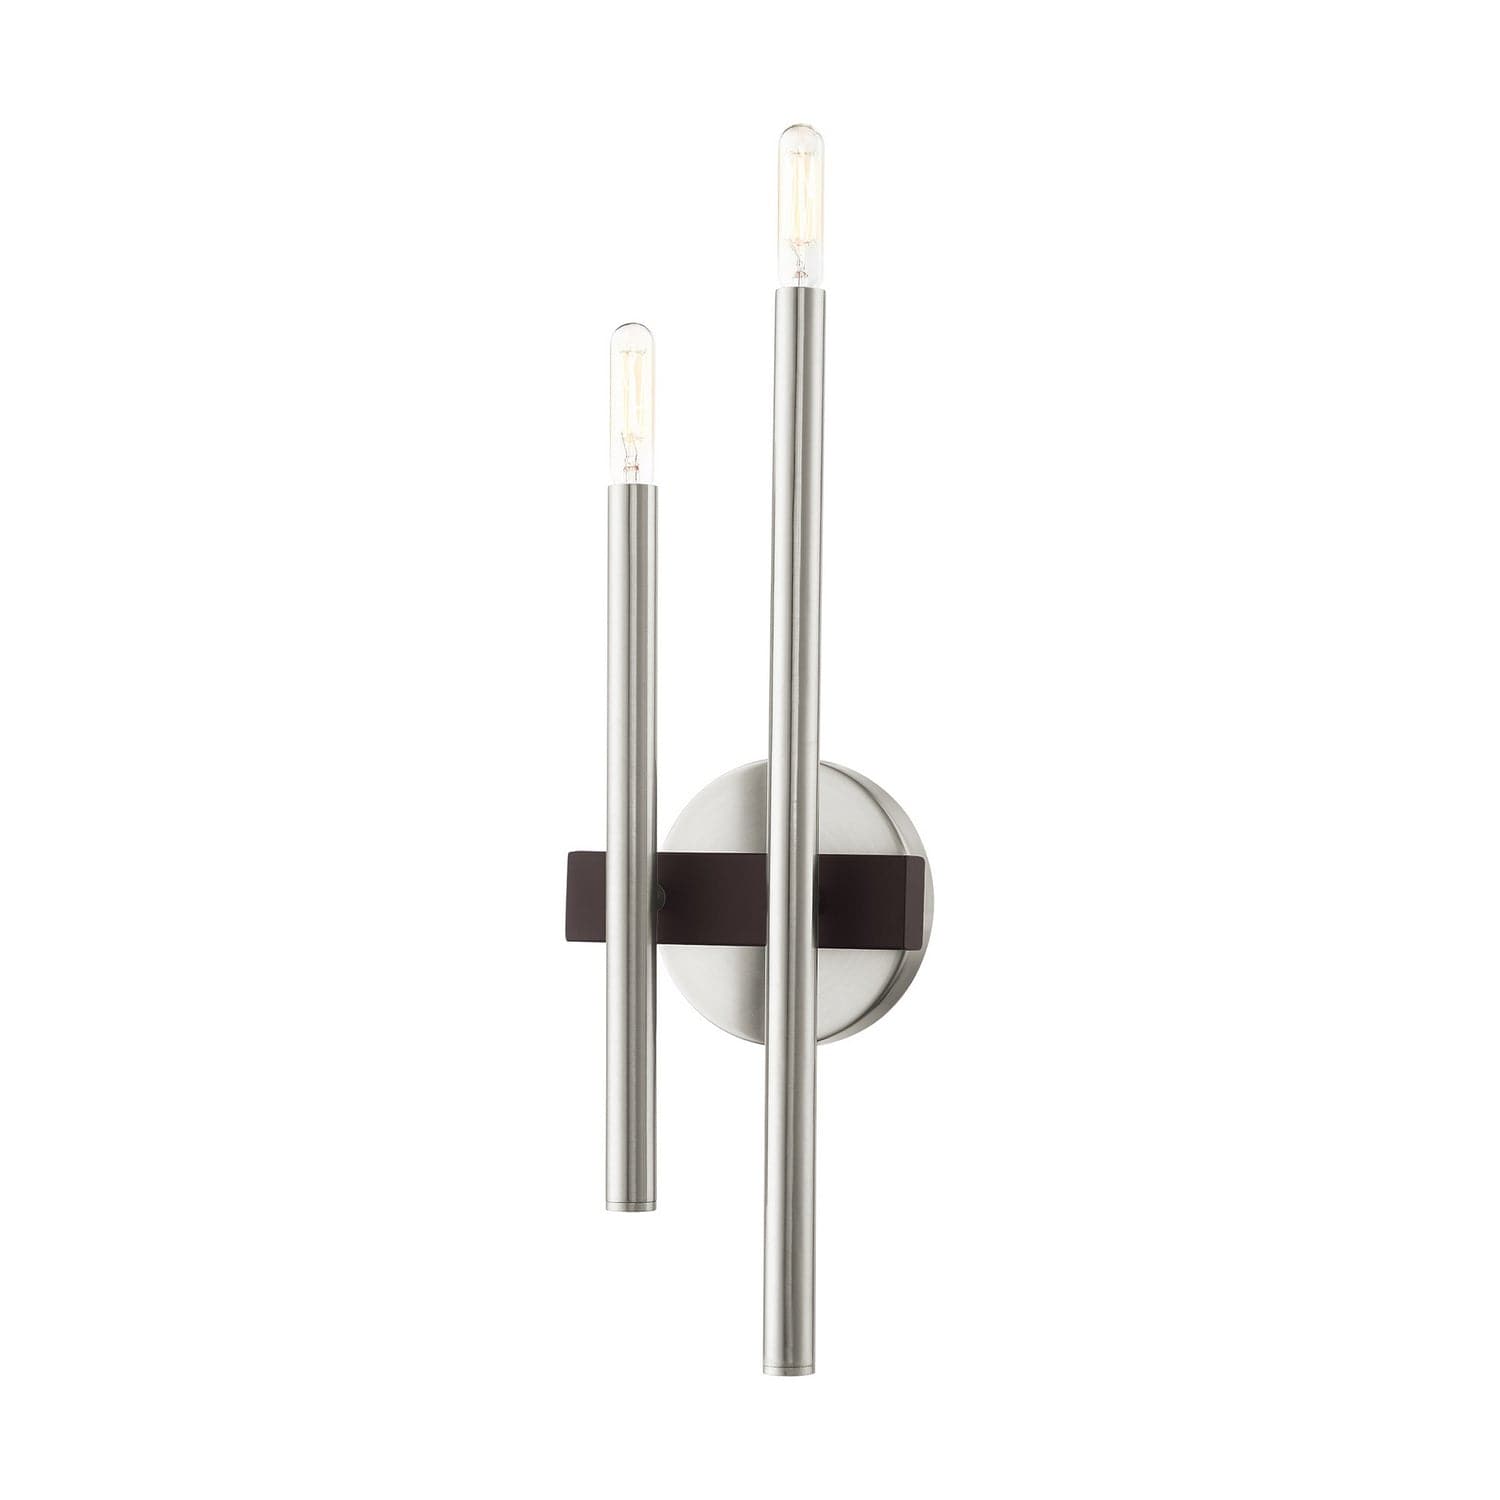 Livex Lighting - 15582-91 - Two Light Wall Sconce - Denmark - Brushed Nickel w/ Bronzes